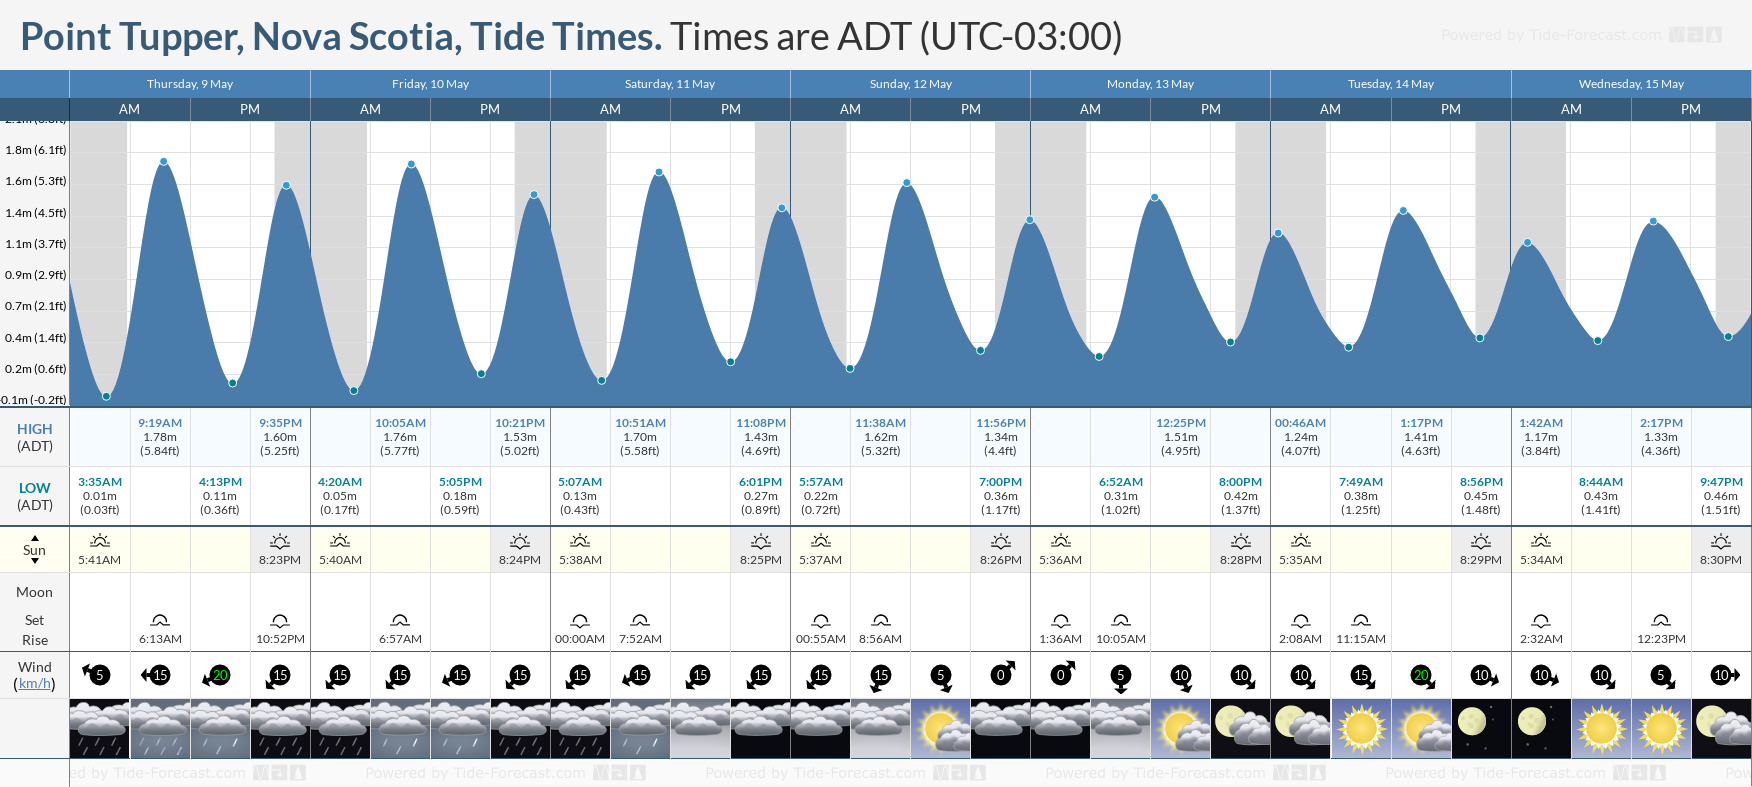 Point Tupper, Nova Scotia Tide Chart including high and low tide tide times for the next 7 days